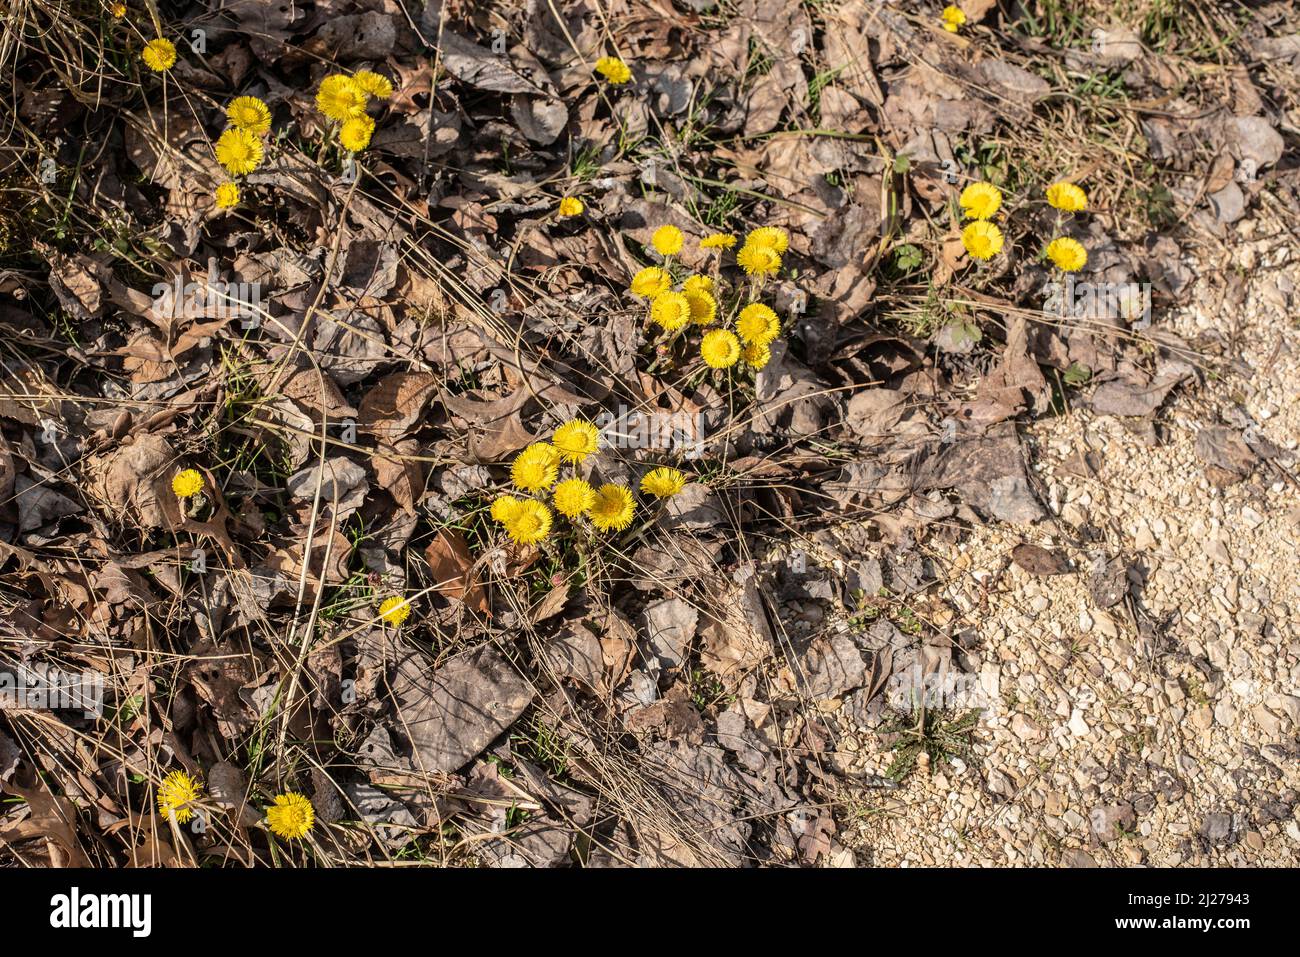 coltsfoot plants with yellow blossoms growing on dry leaves next to a gravel path Stock Photo